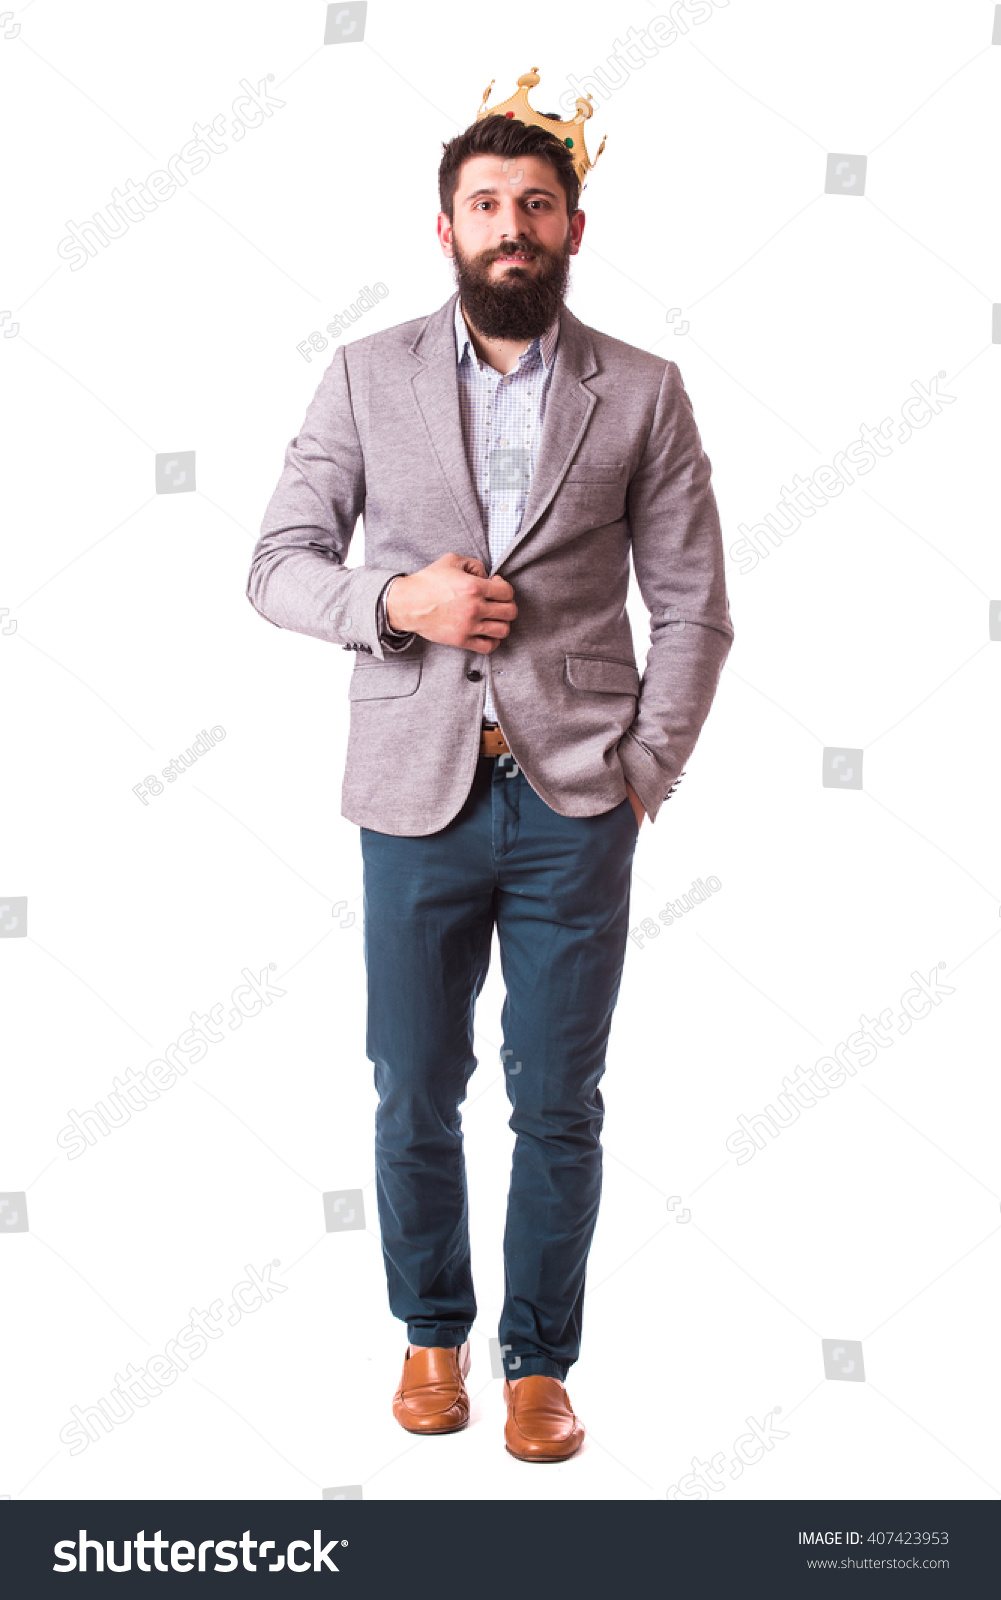 Handsome young cheerful man in suit with crown while standing against white background #407423953